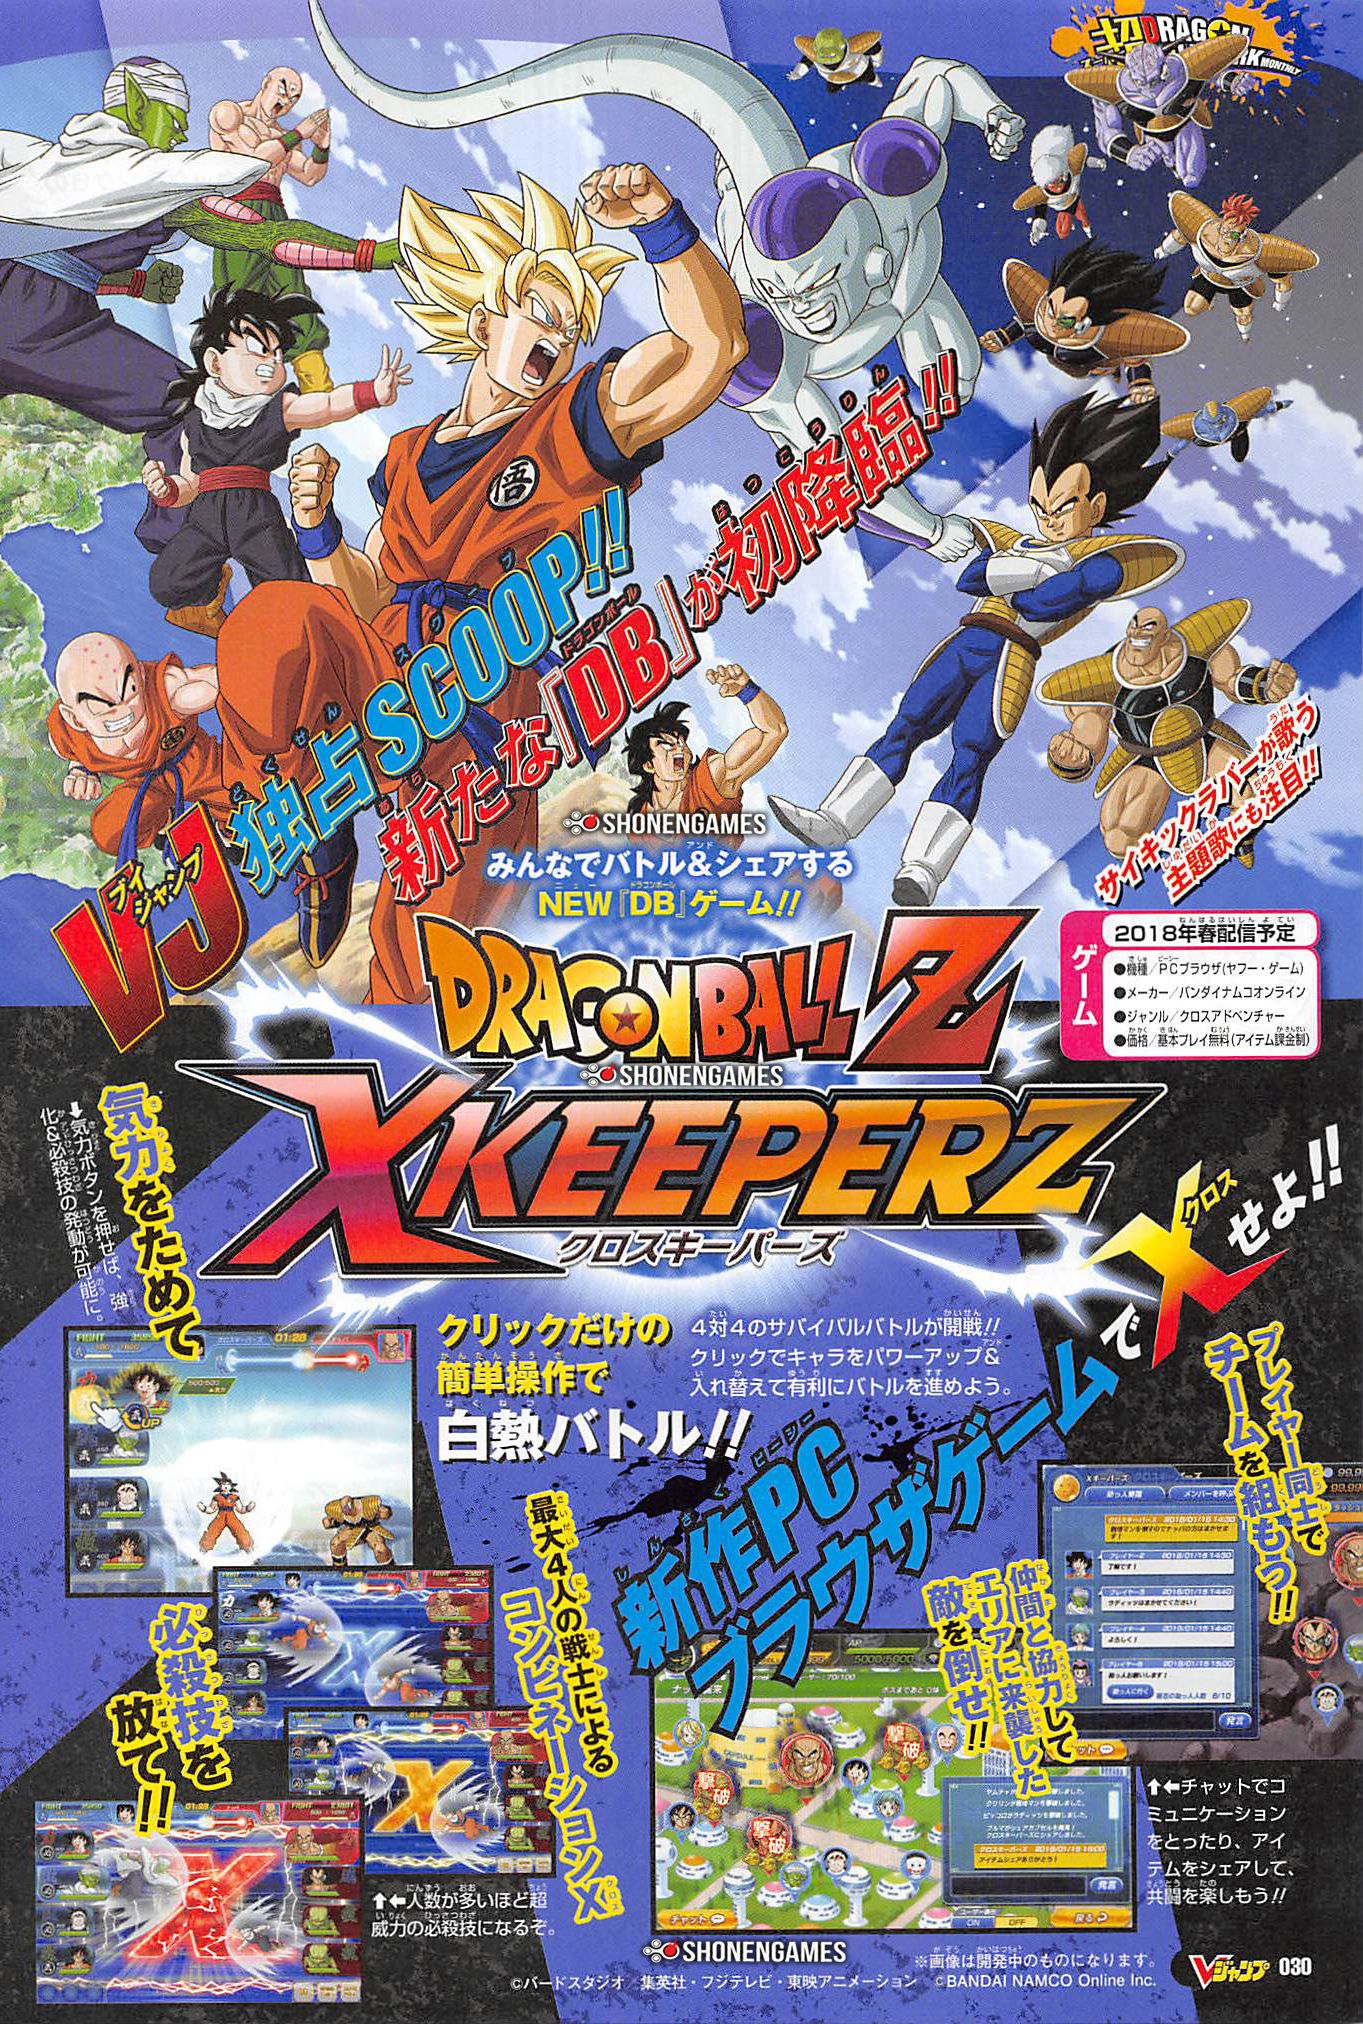 Dragon Ball Z: XKeeperz - New web browser game announced for Japan - MMO  Culture